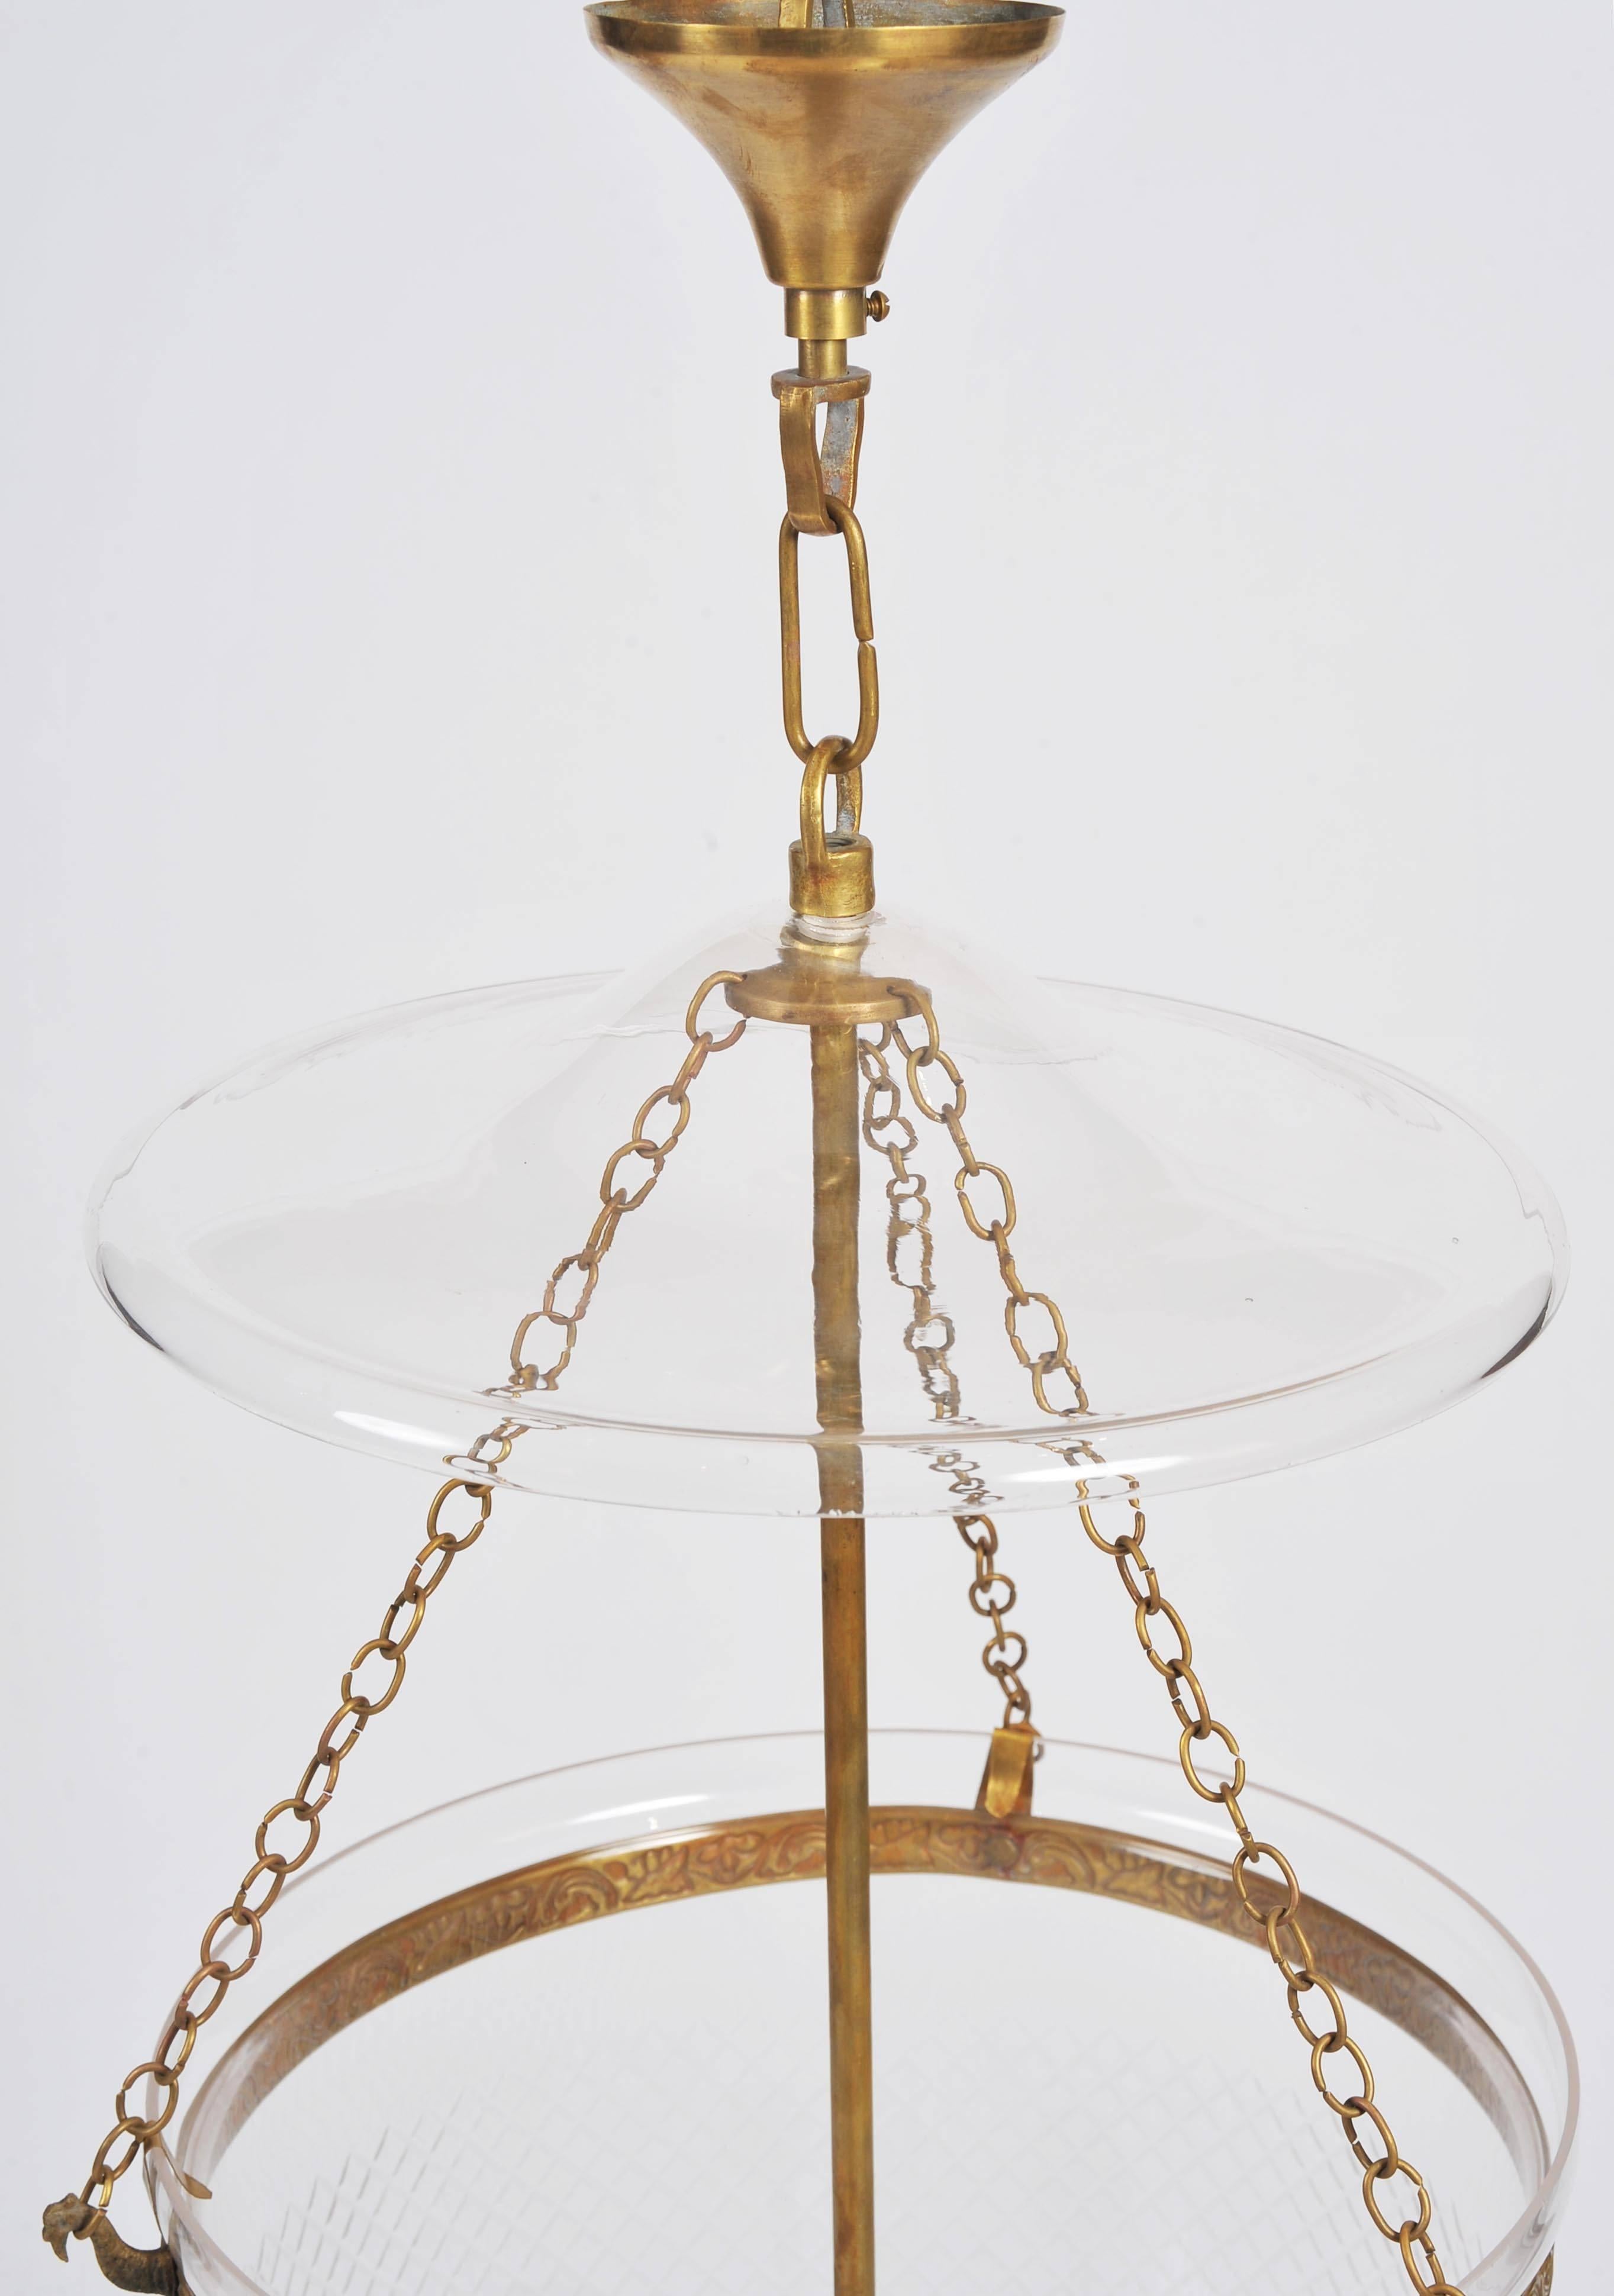 Large Storm Lantern with Brass Fittings 2